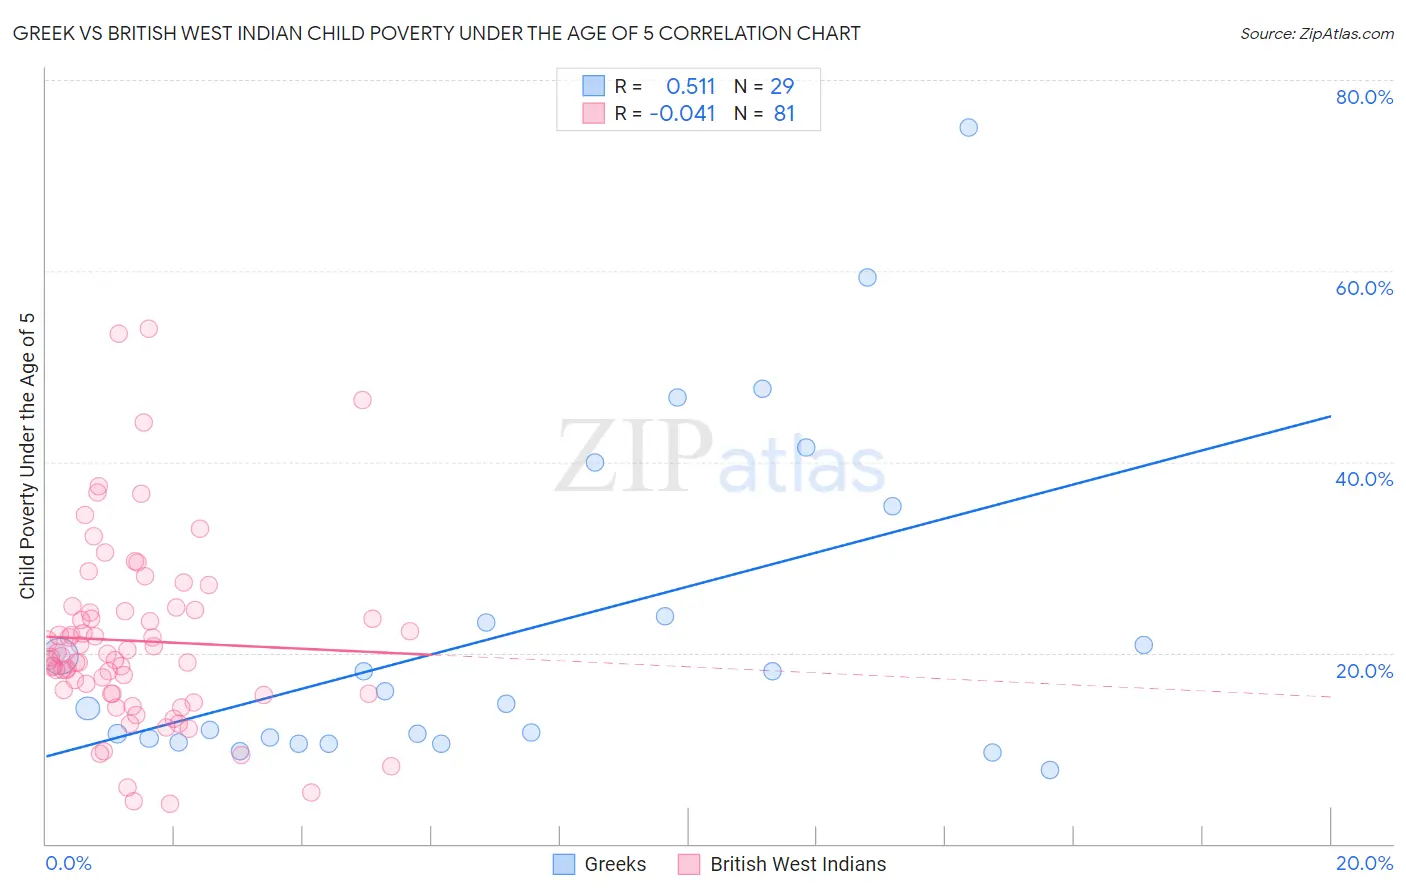 Greek vs British West Indian Child Poverty Under the Age of 5